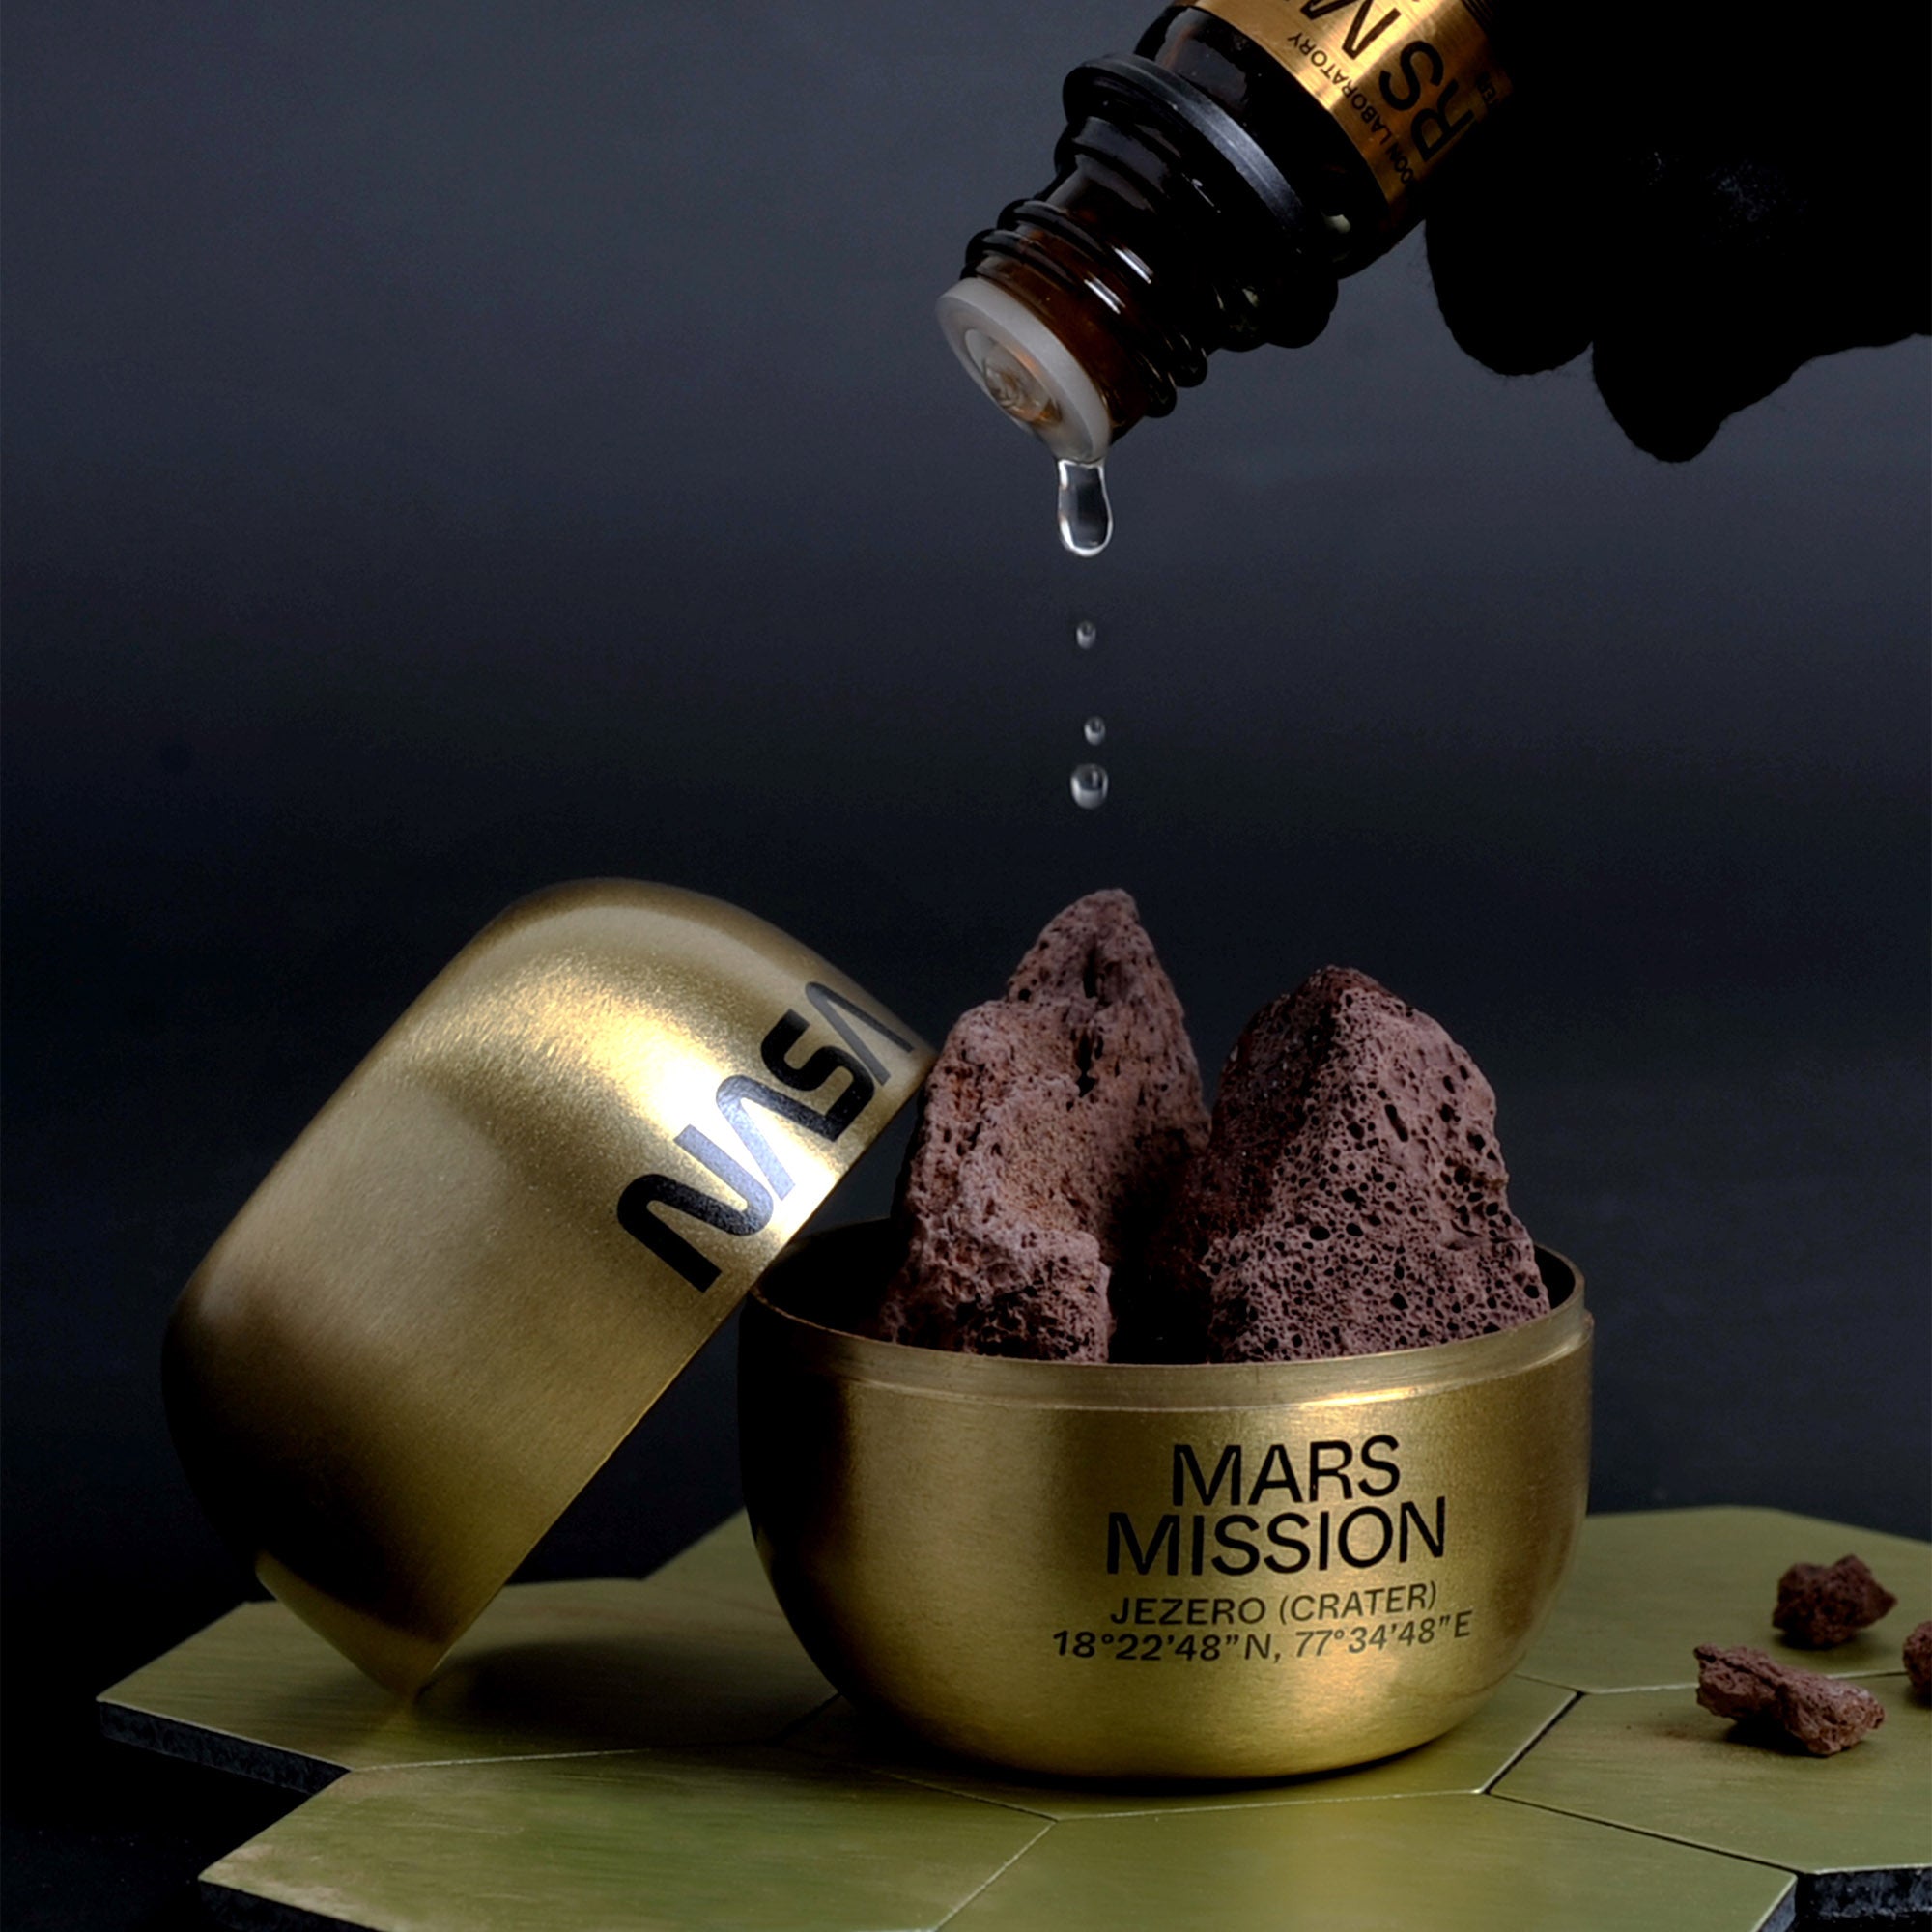 The Mars Scent is a scented potpourri with an imaginary aroma of Mars, it comes with a special brass capsule with NASA logo print. A collaboration with Moon Laboratory.